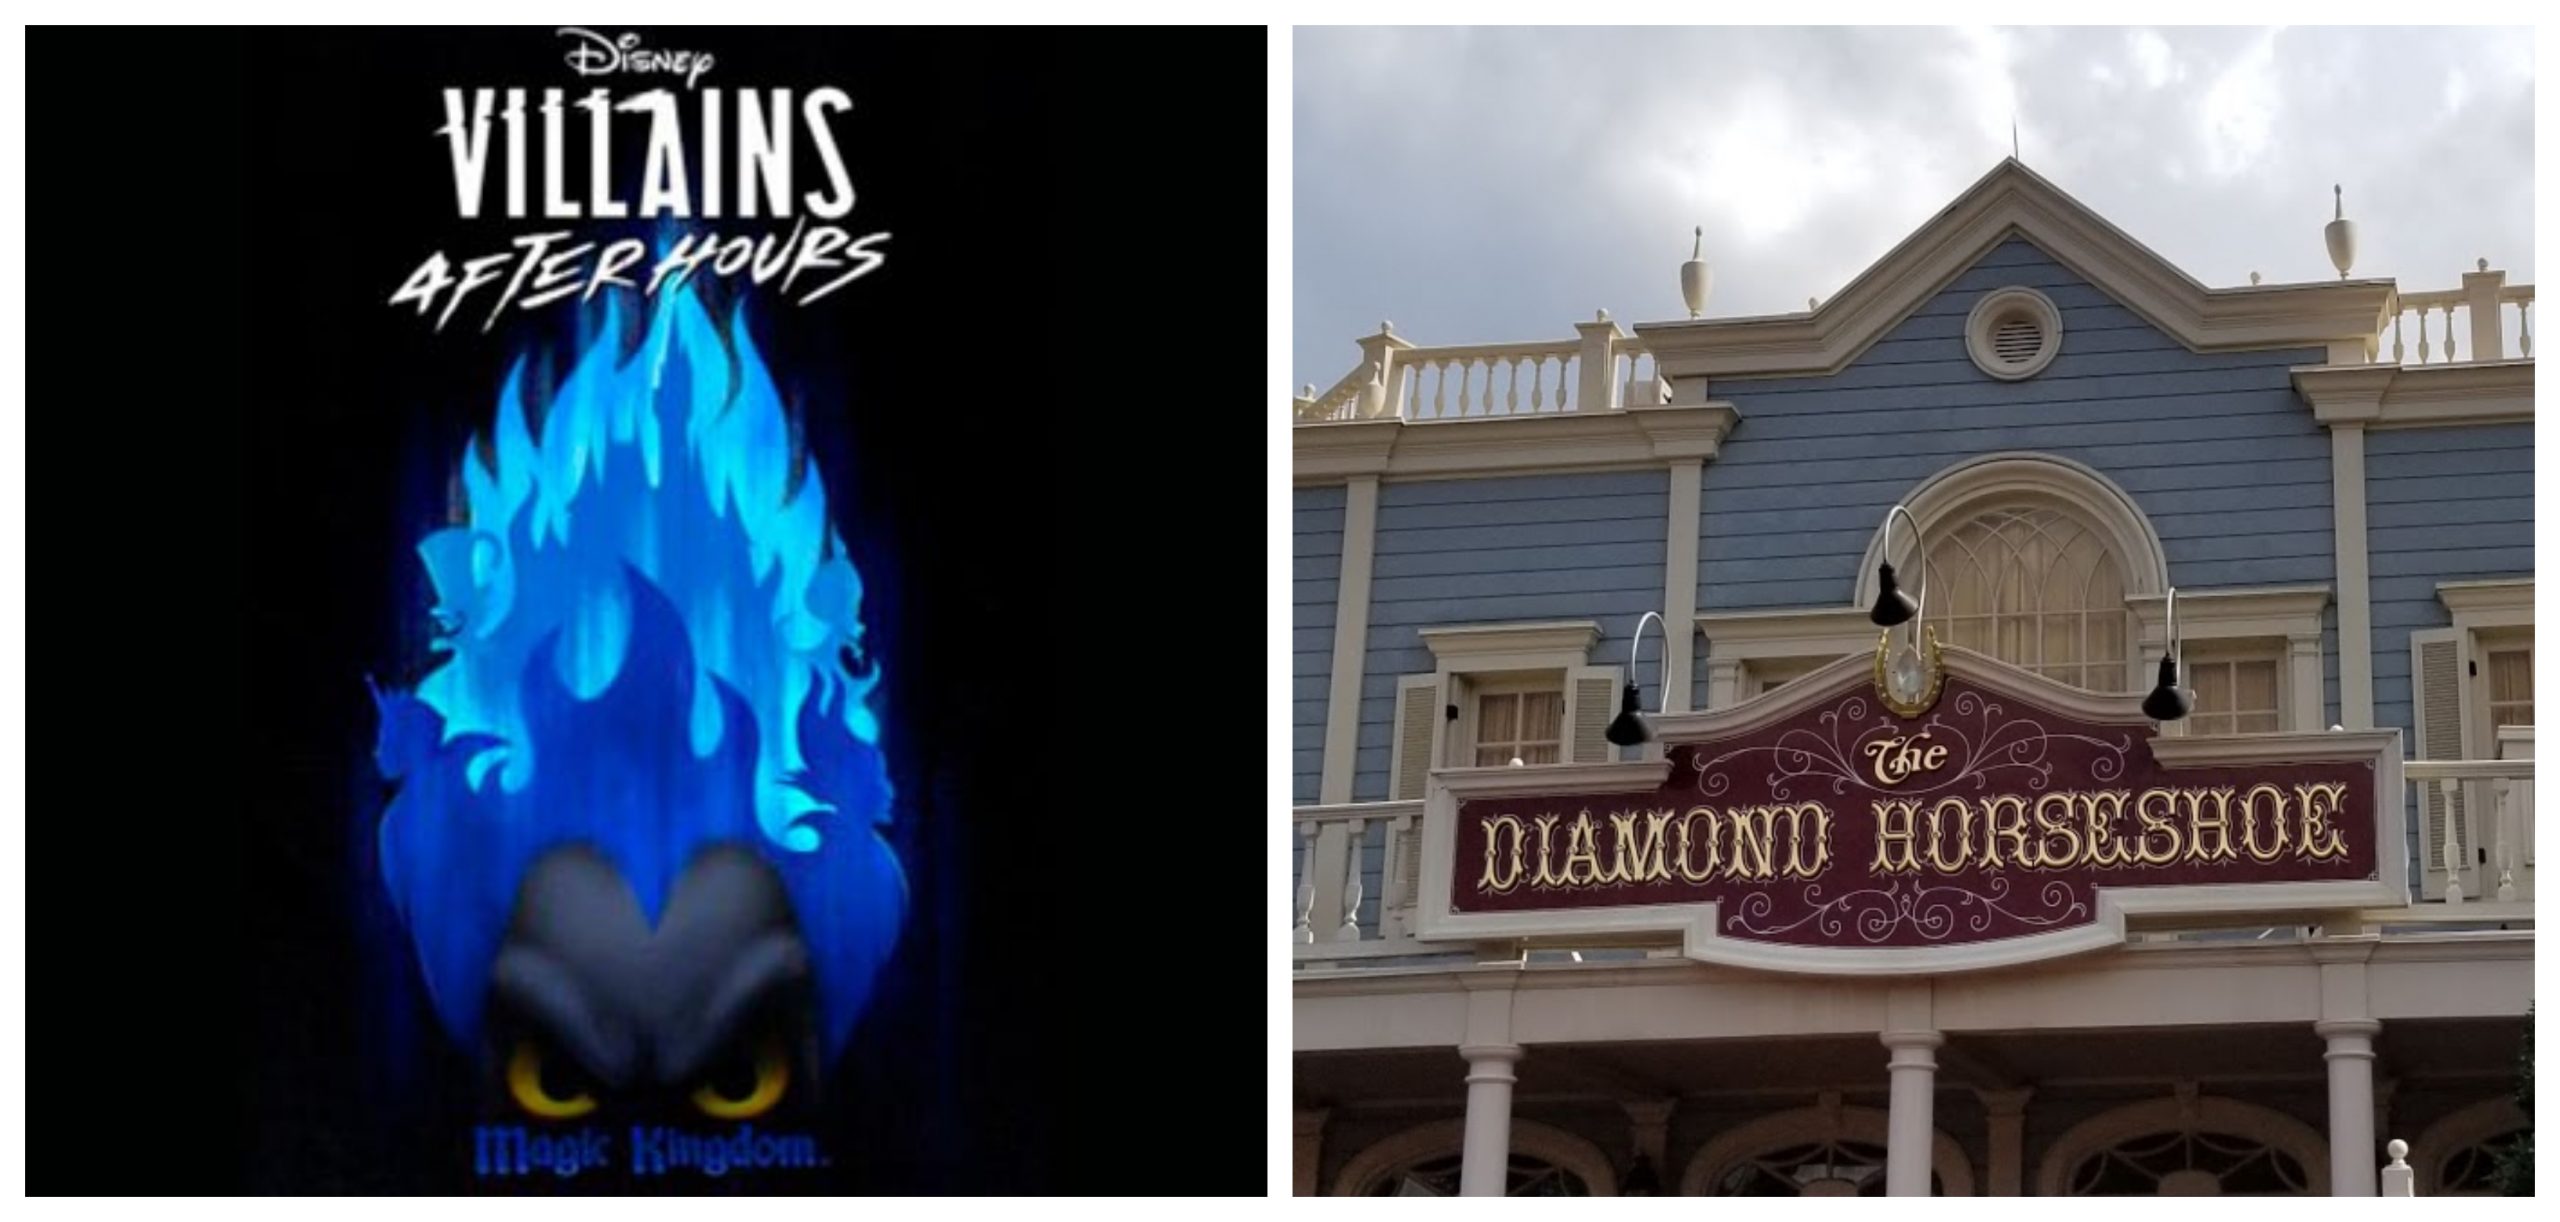 The Diamond Horseshoe Saloon to become a Villains Lounge during Villains After Hours Parties!